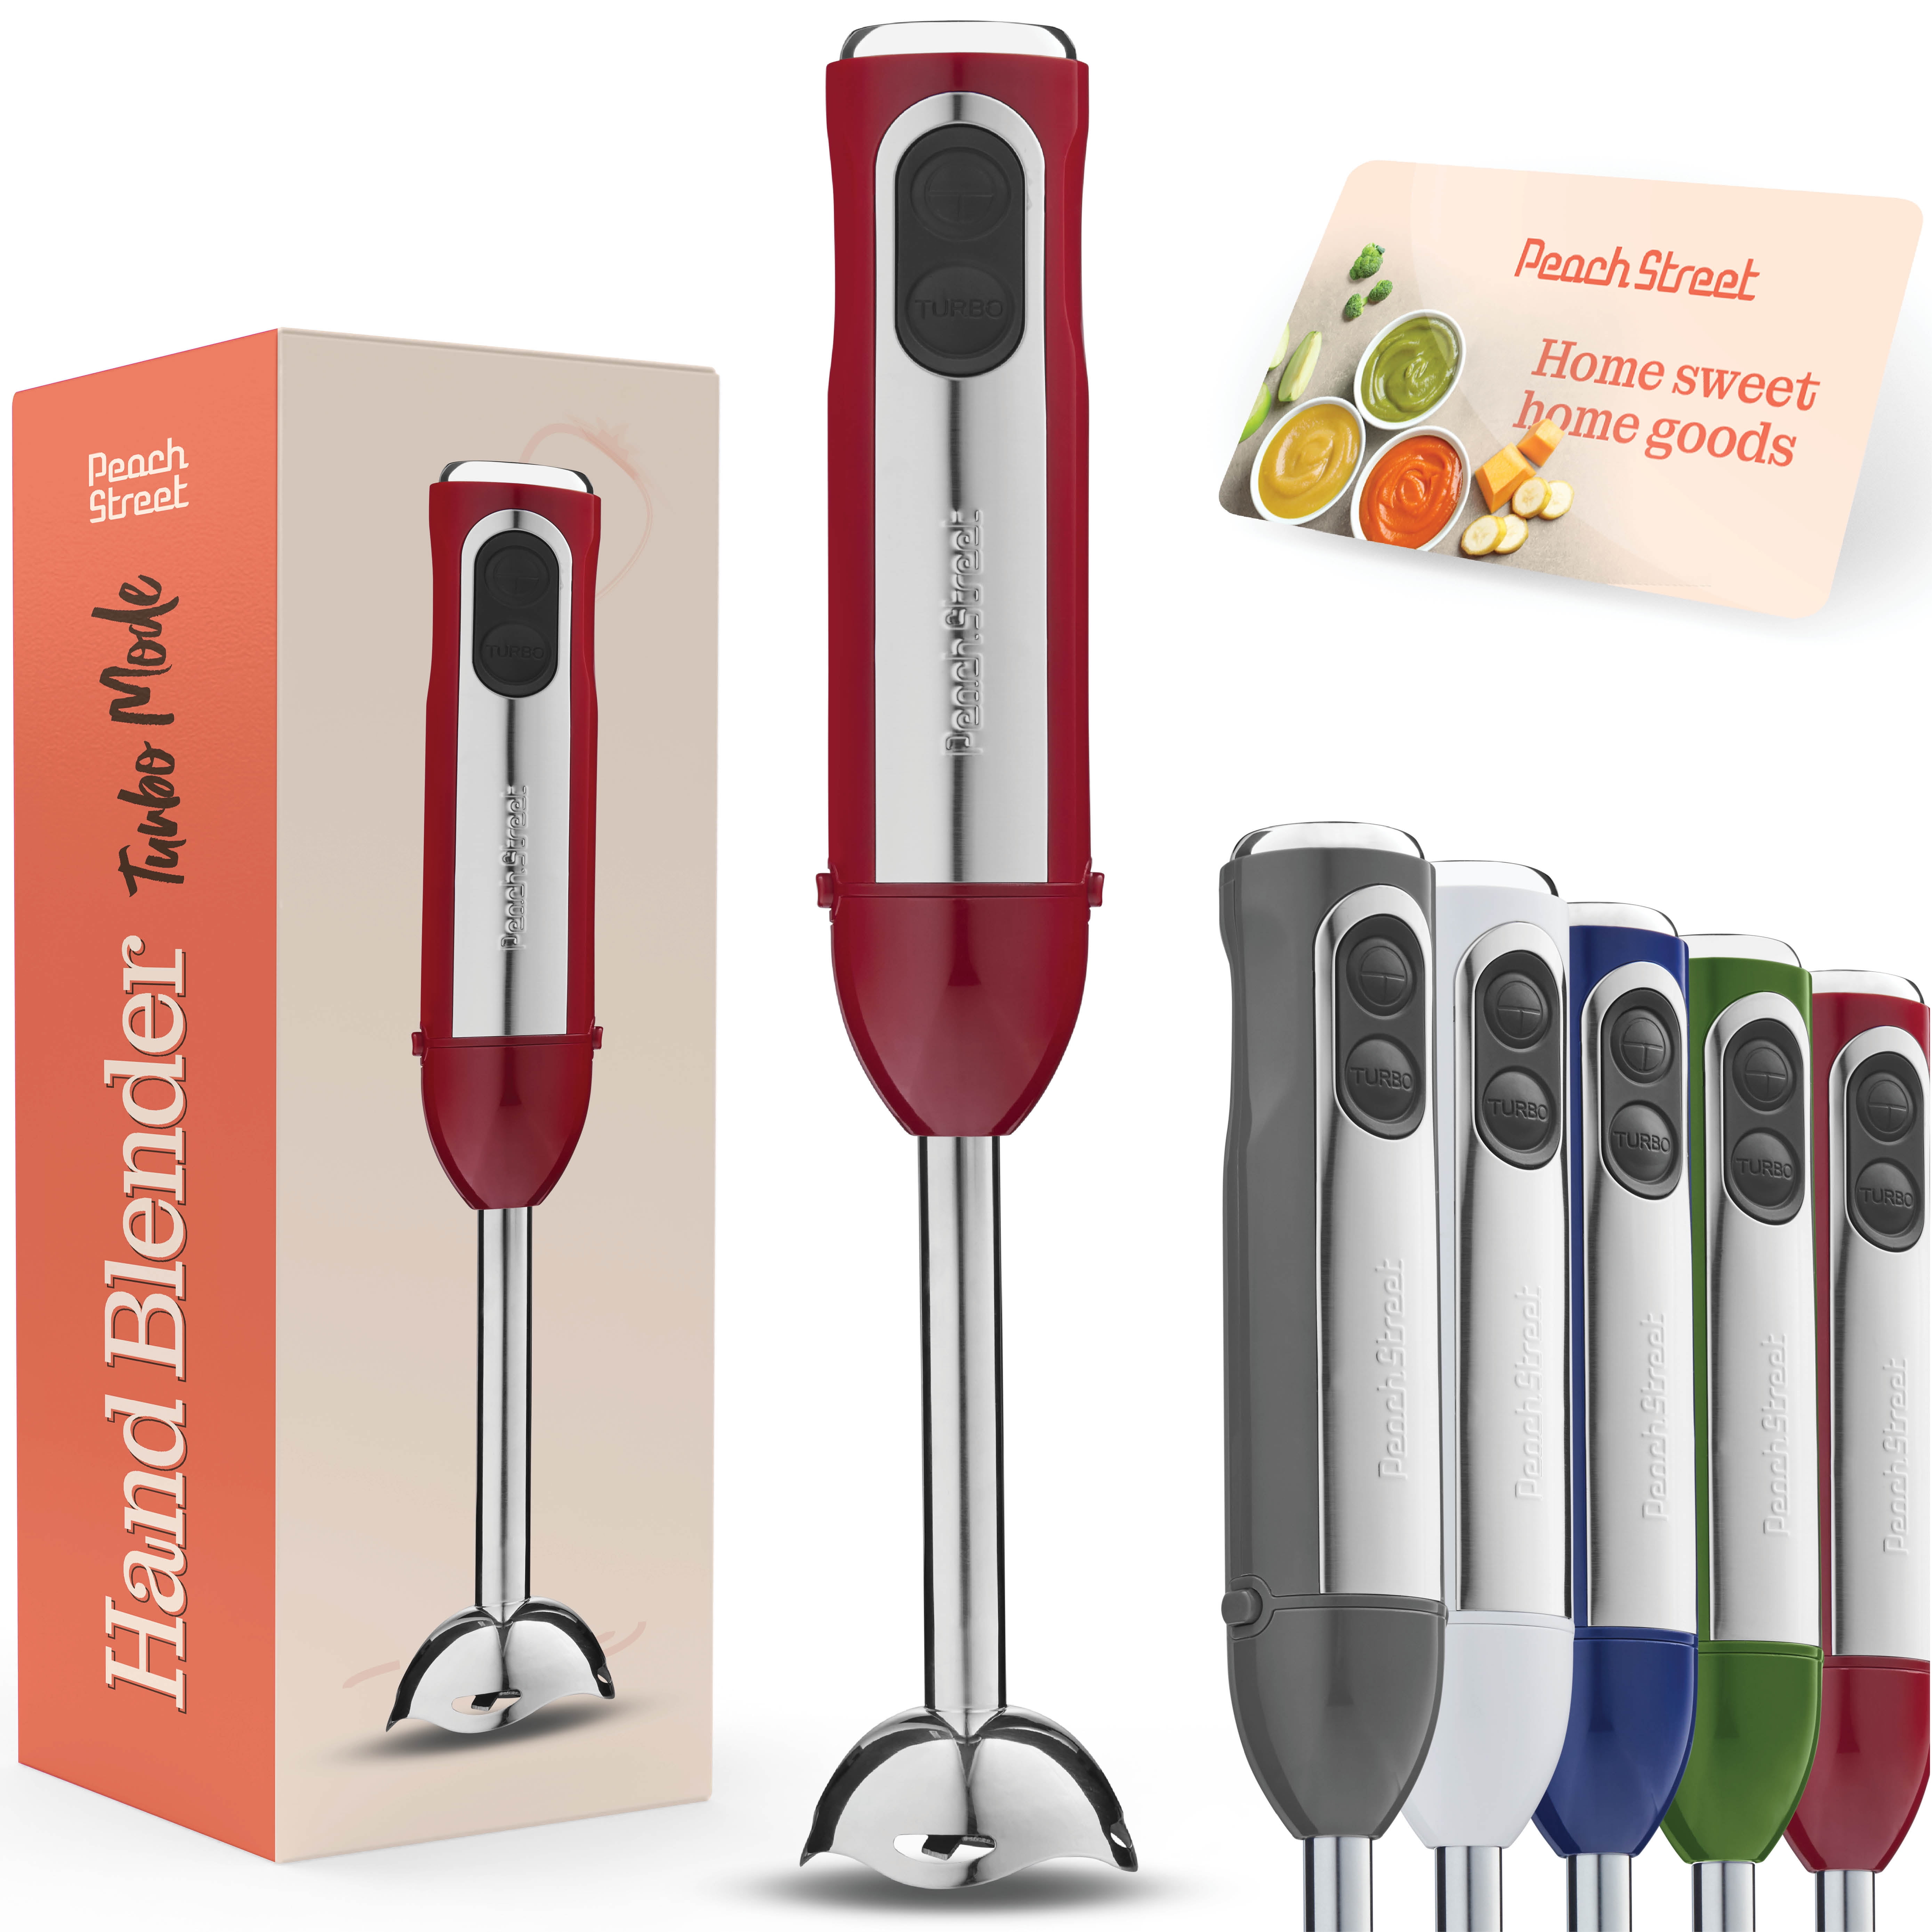 Powerful Immersion Blender GE 500w of power in a multi-purpose hand blender